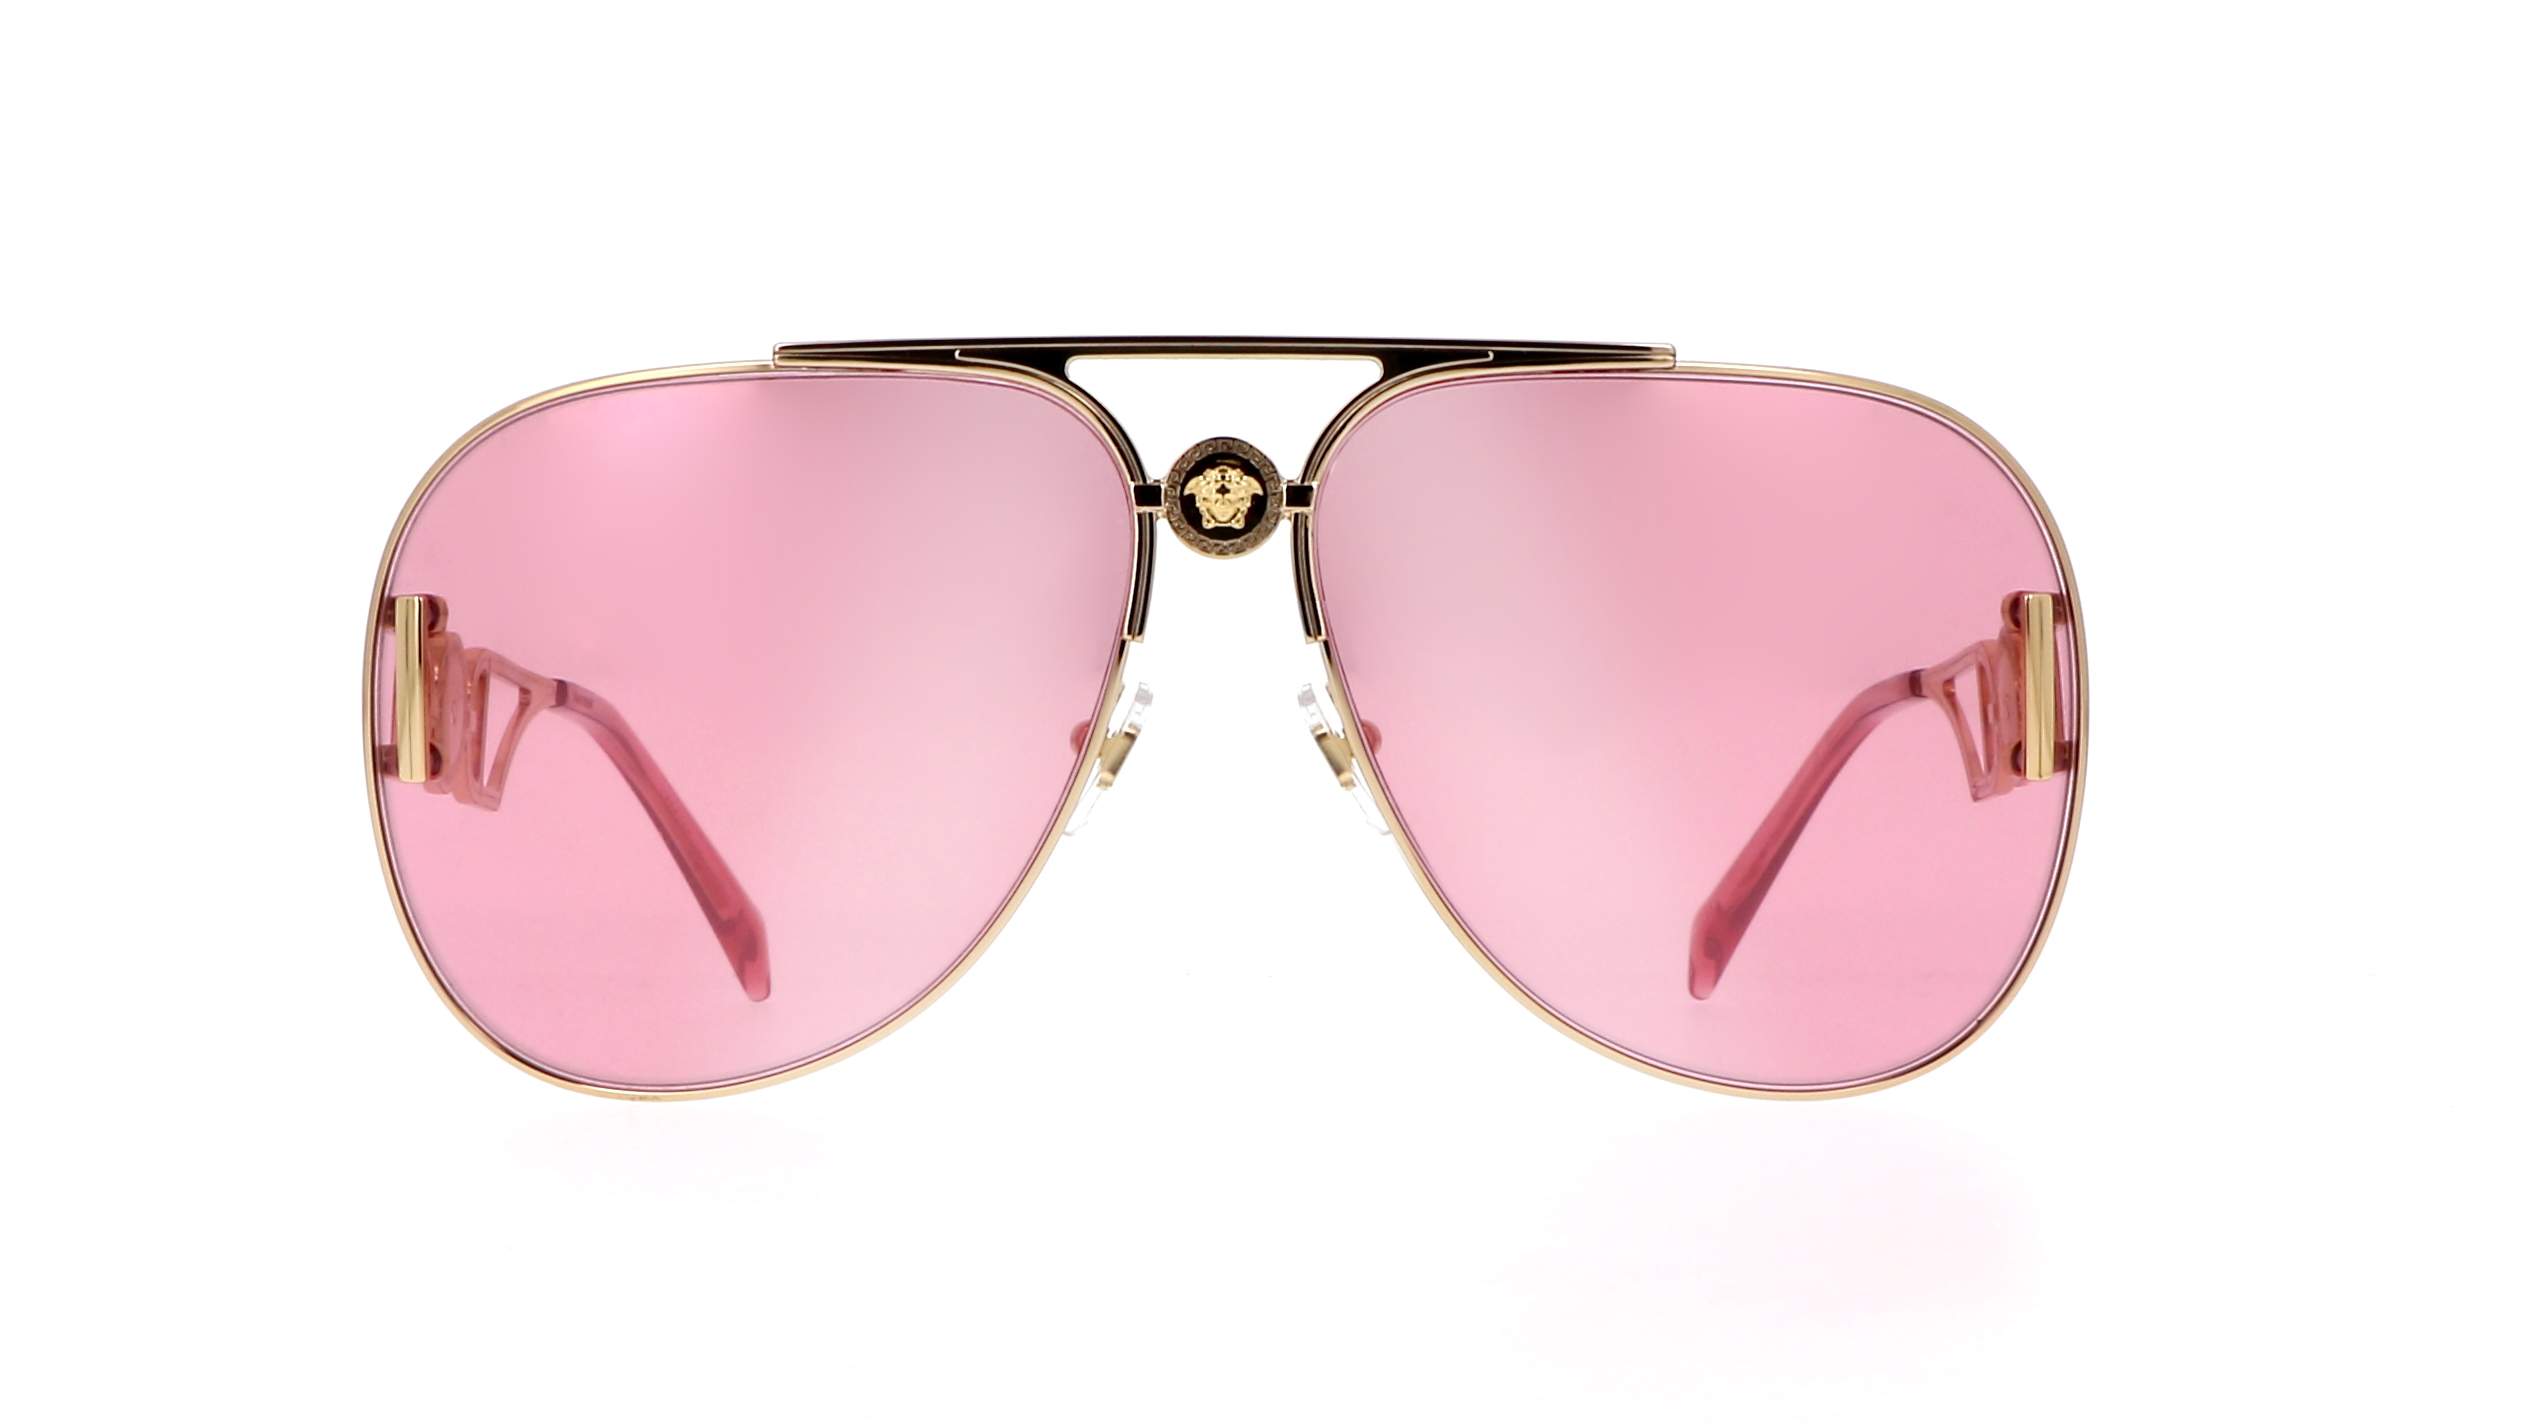 Sunglasses Versace VE2255 1002/A4 63-13 Gold in stock | Price 162,46